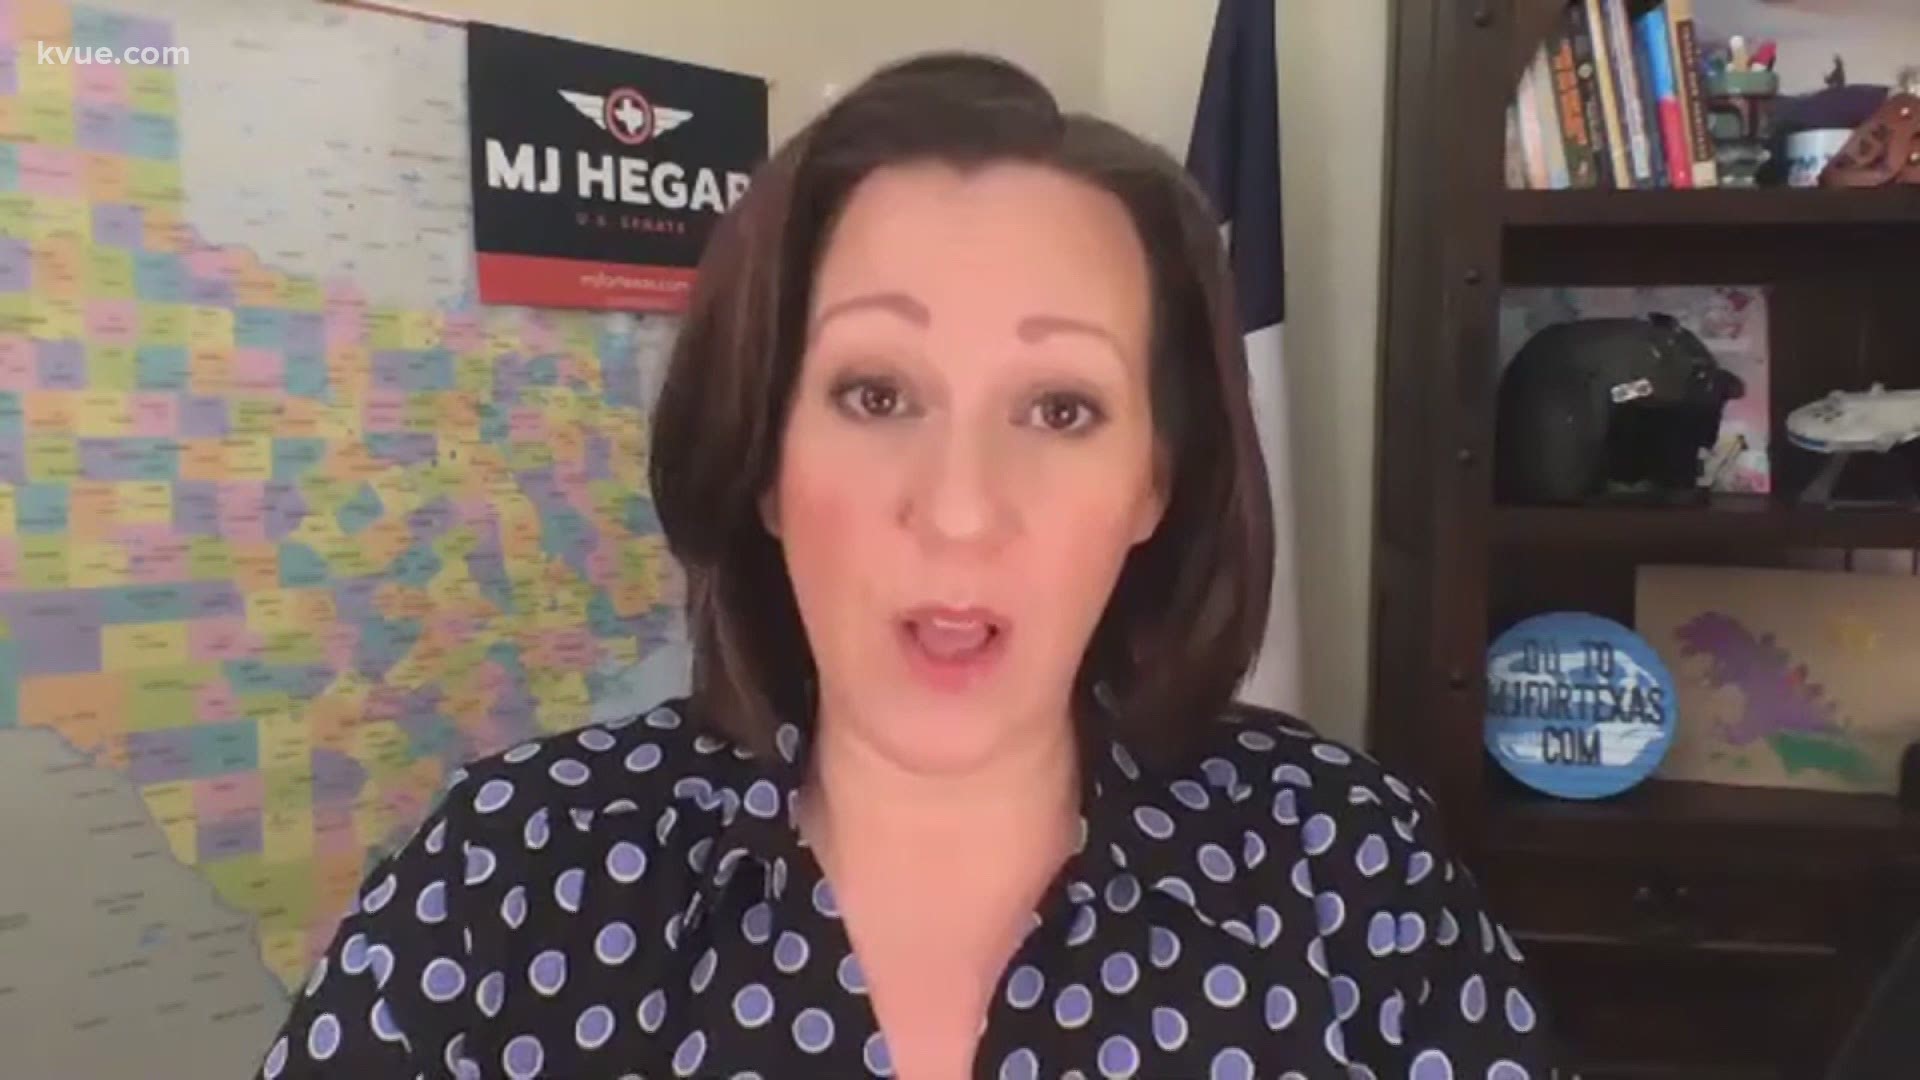 Veteran MJ Hegar has challenged her opponent, Sen. John Cornyn, to three televised events. So far, Cornyn has only agreed to one.